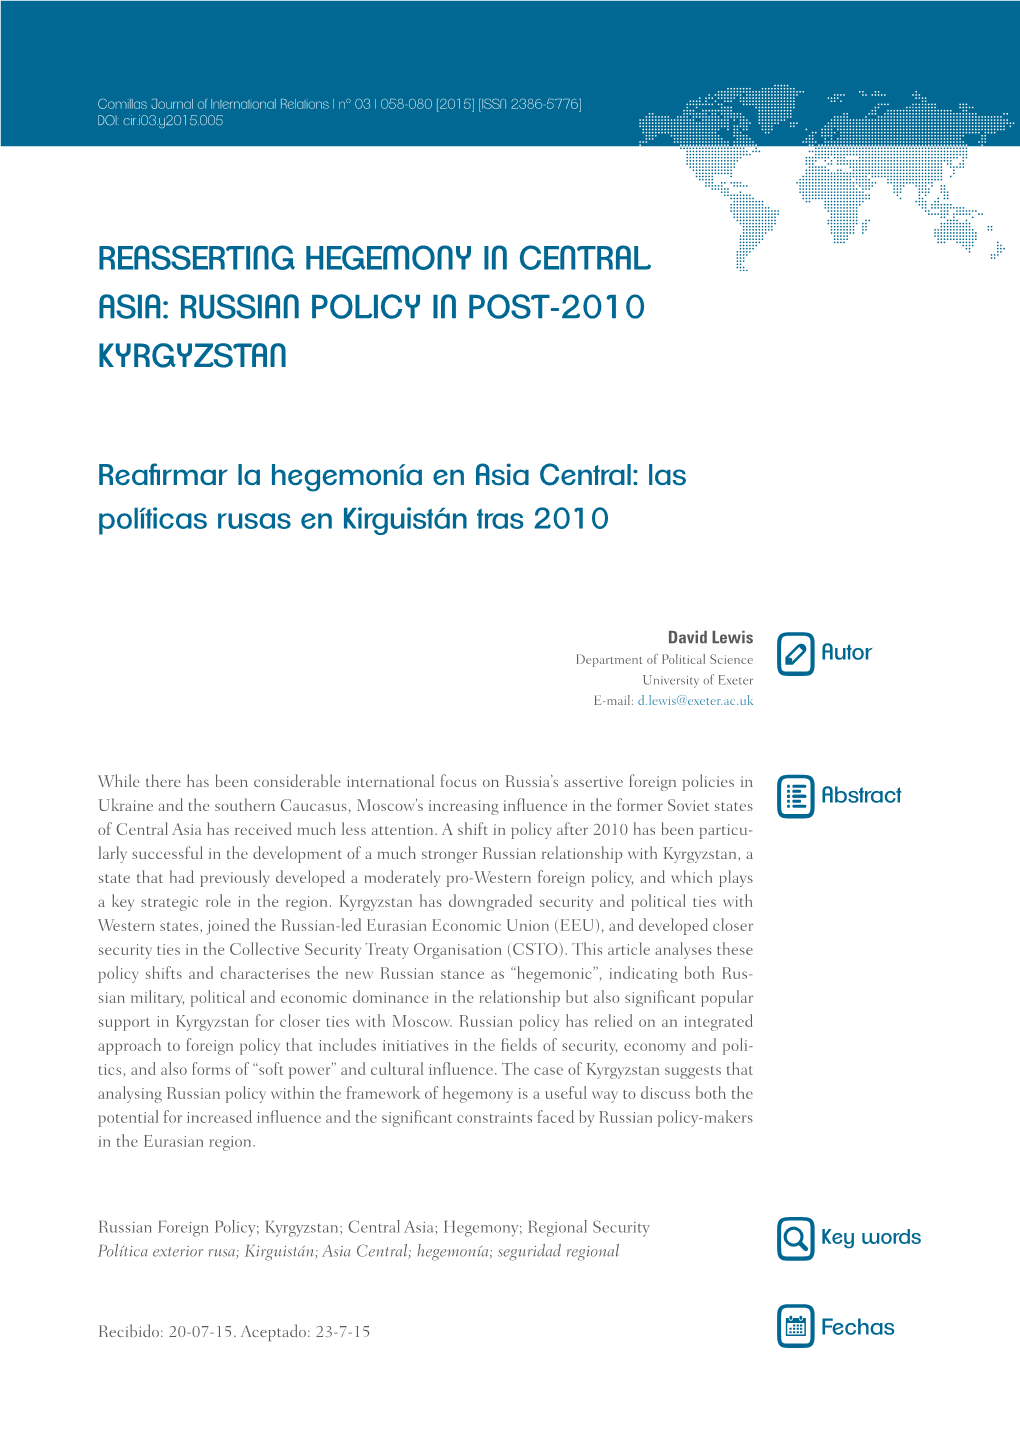 Reasserting Hegemony in Central Asia: Russian Policy in Post-2010 Kyrgyzstan